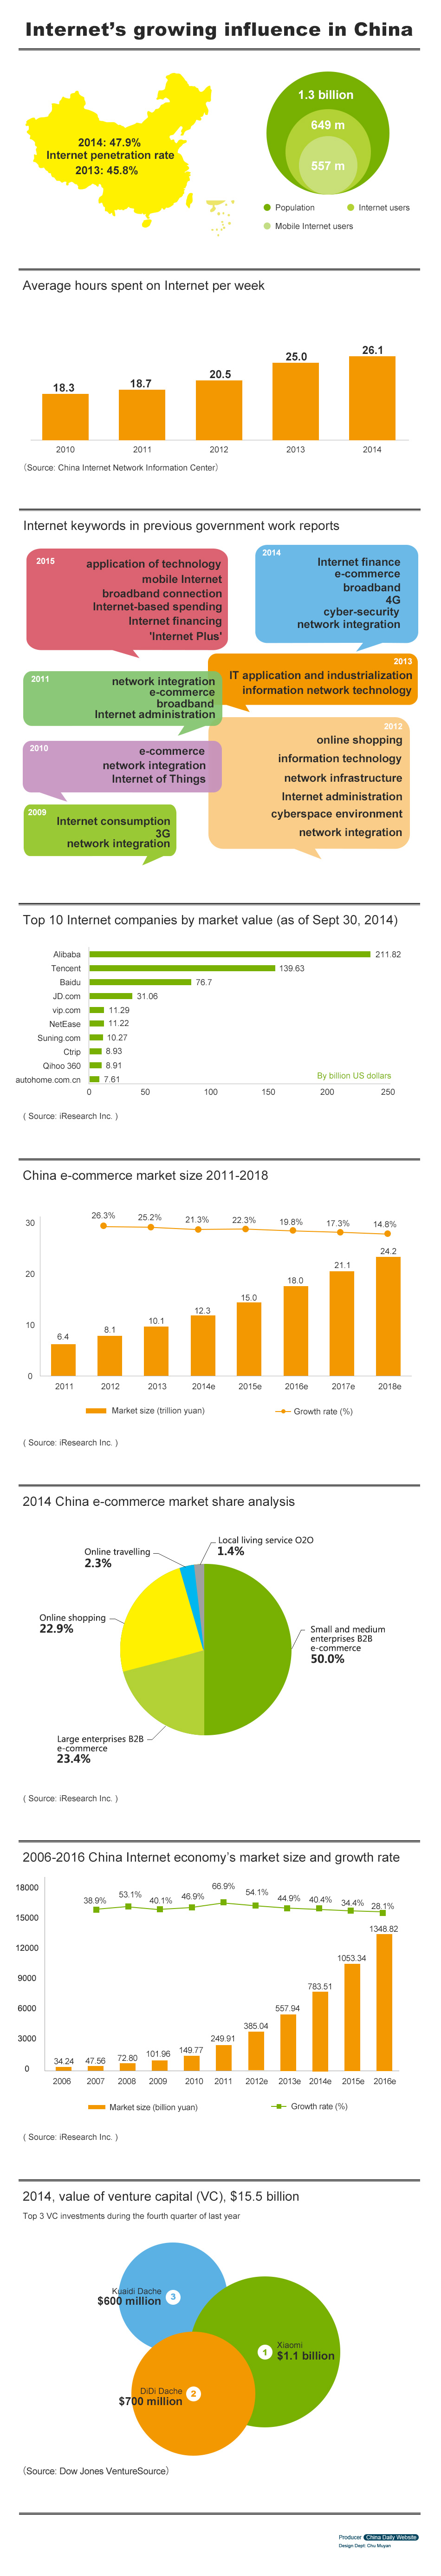 Infographic: Internet's growing influence in China